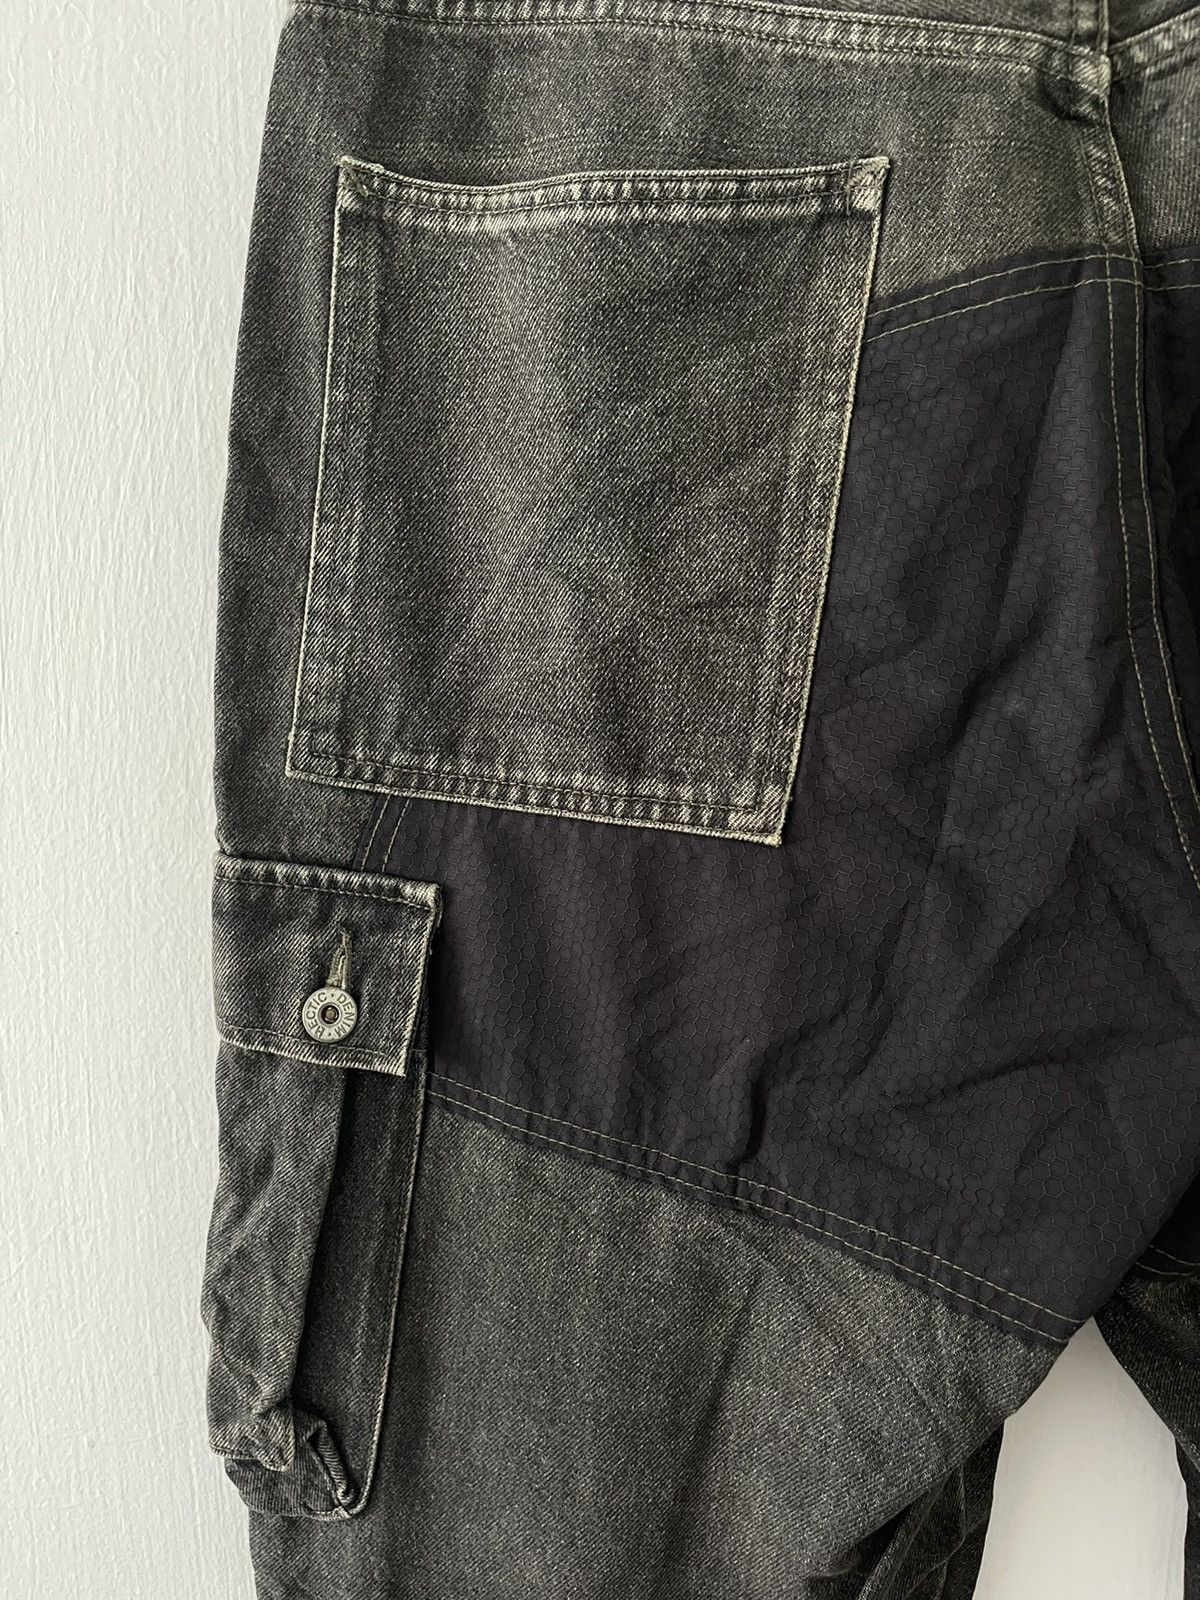 If Six Was Nine - Mad Hectic Scout Japan Rider Biker Cargo Jeans - 8